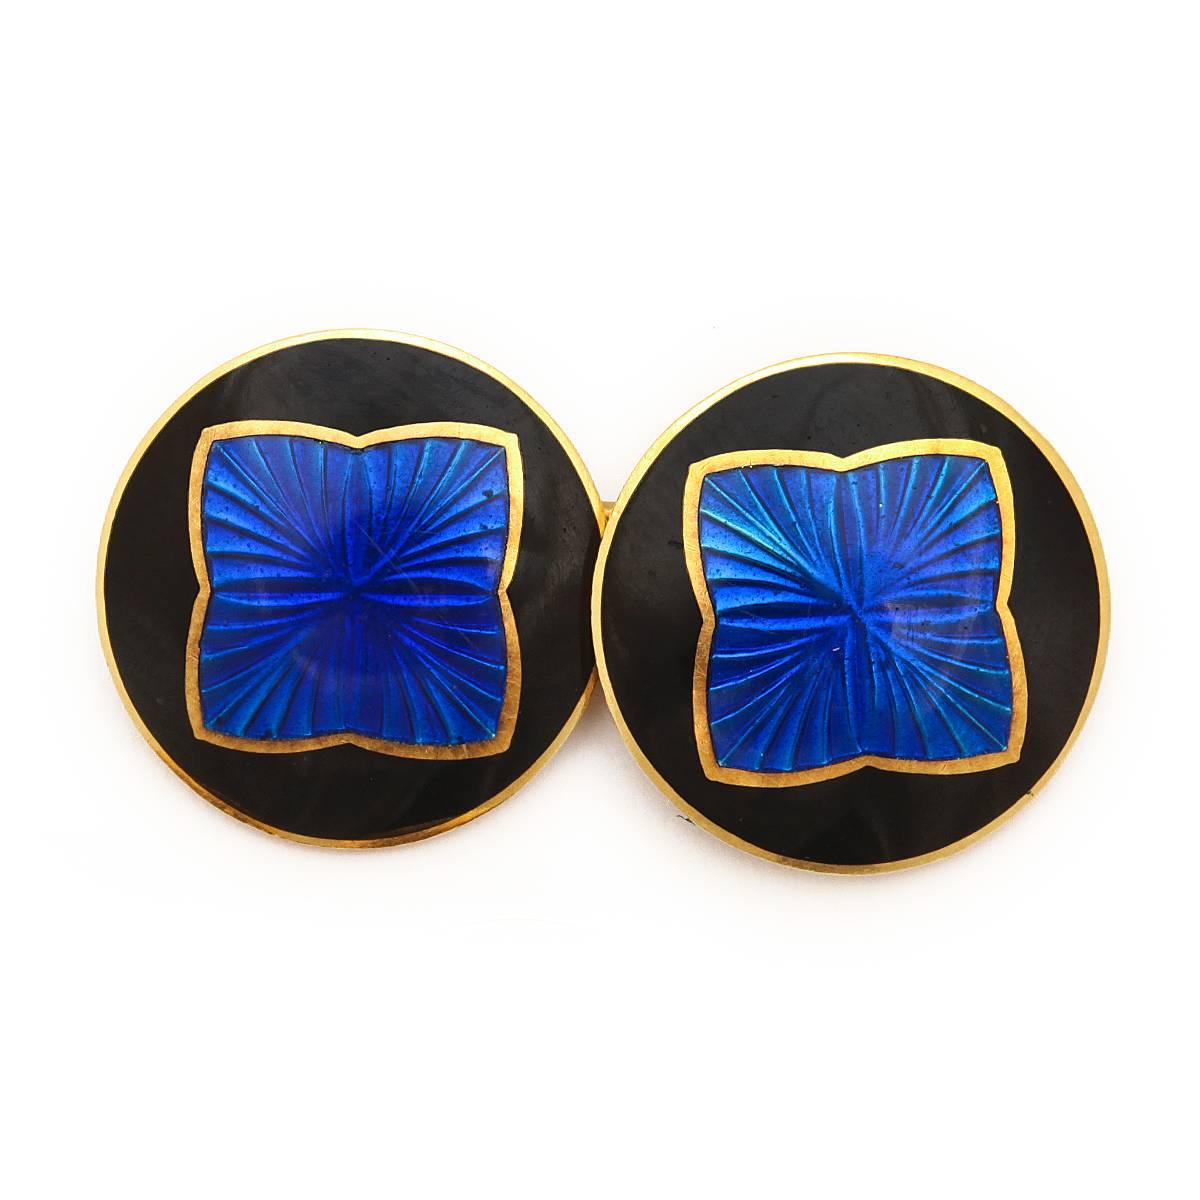 Antique Enamel Gold Cufflinks In Excellent Condition For Sale In New York, NY